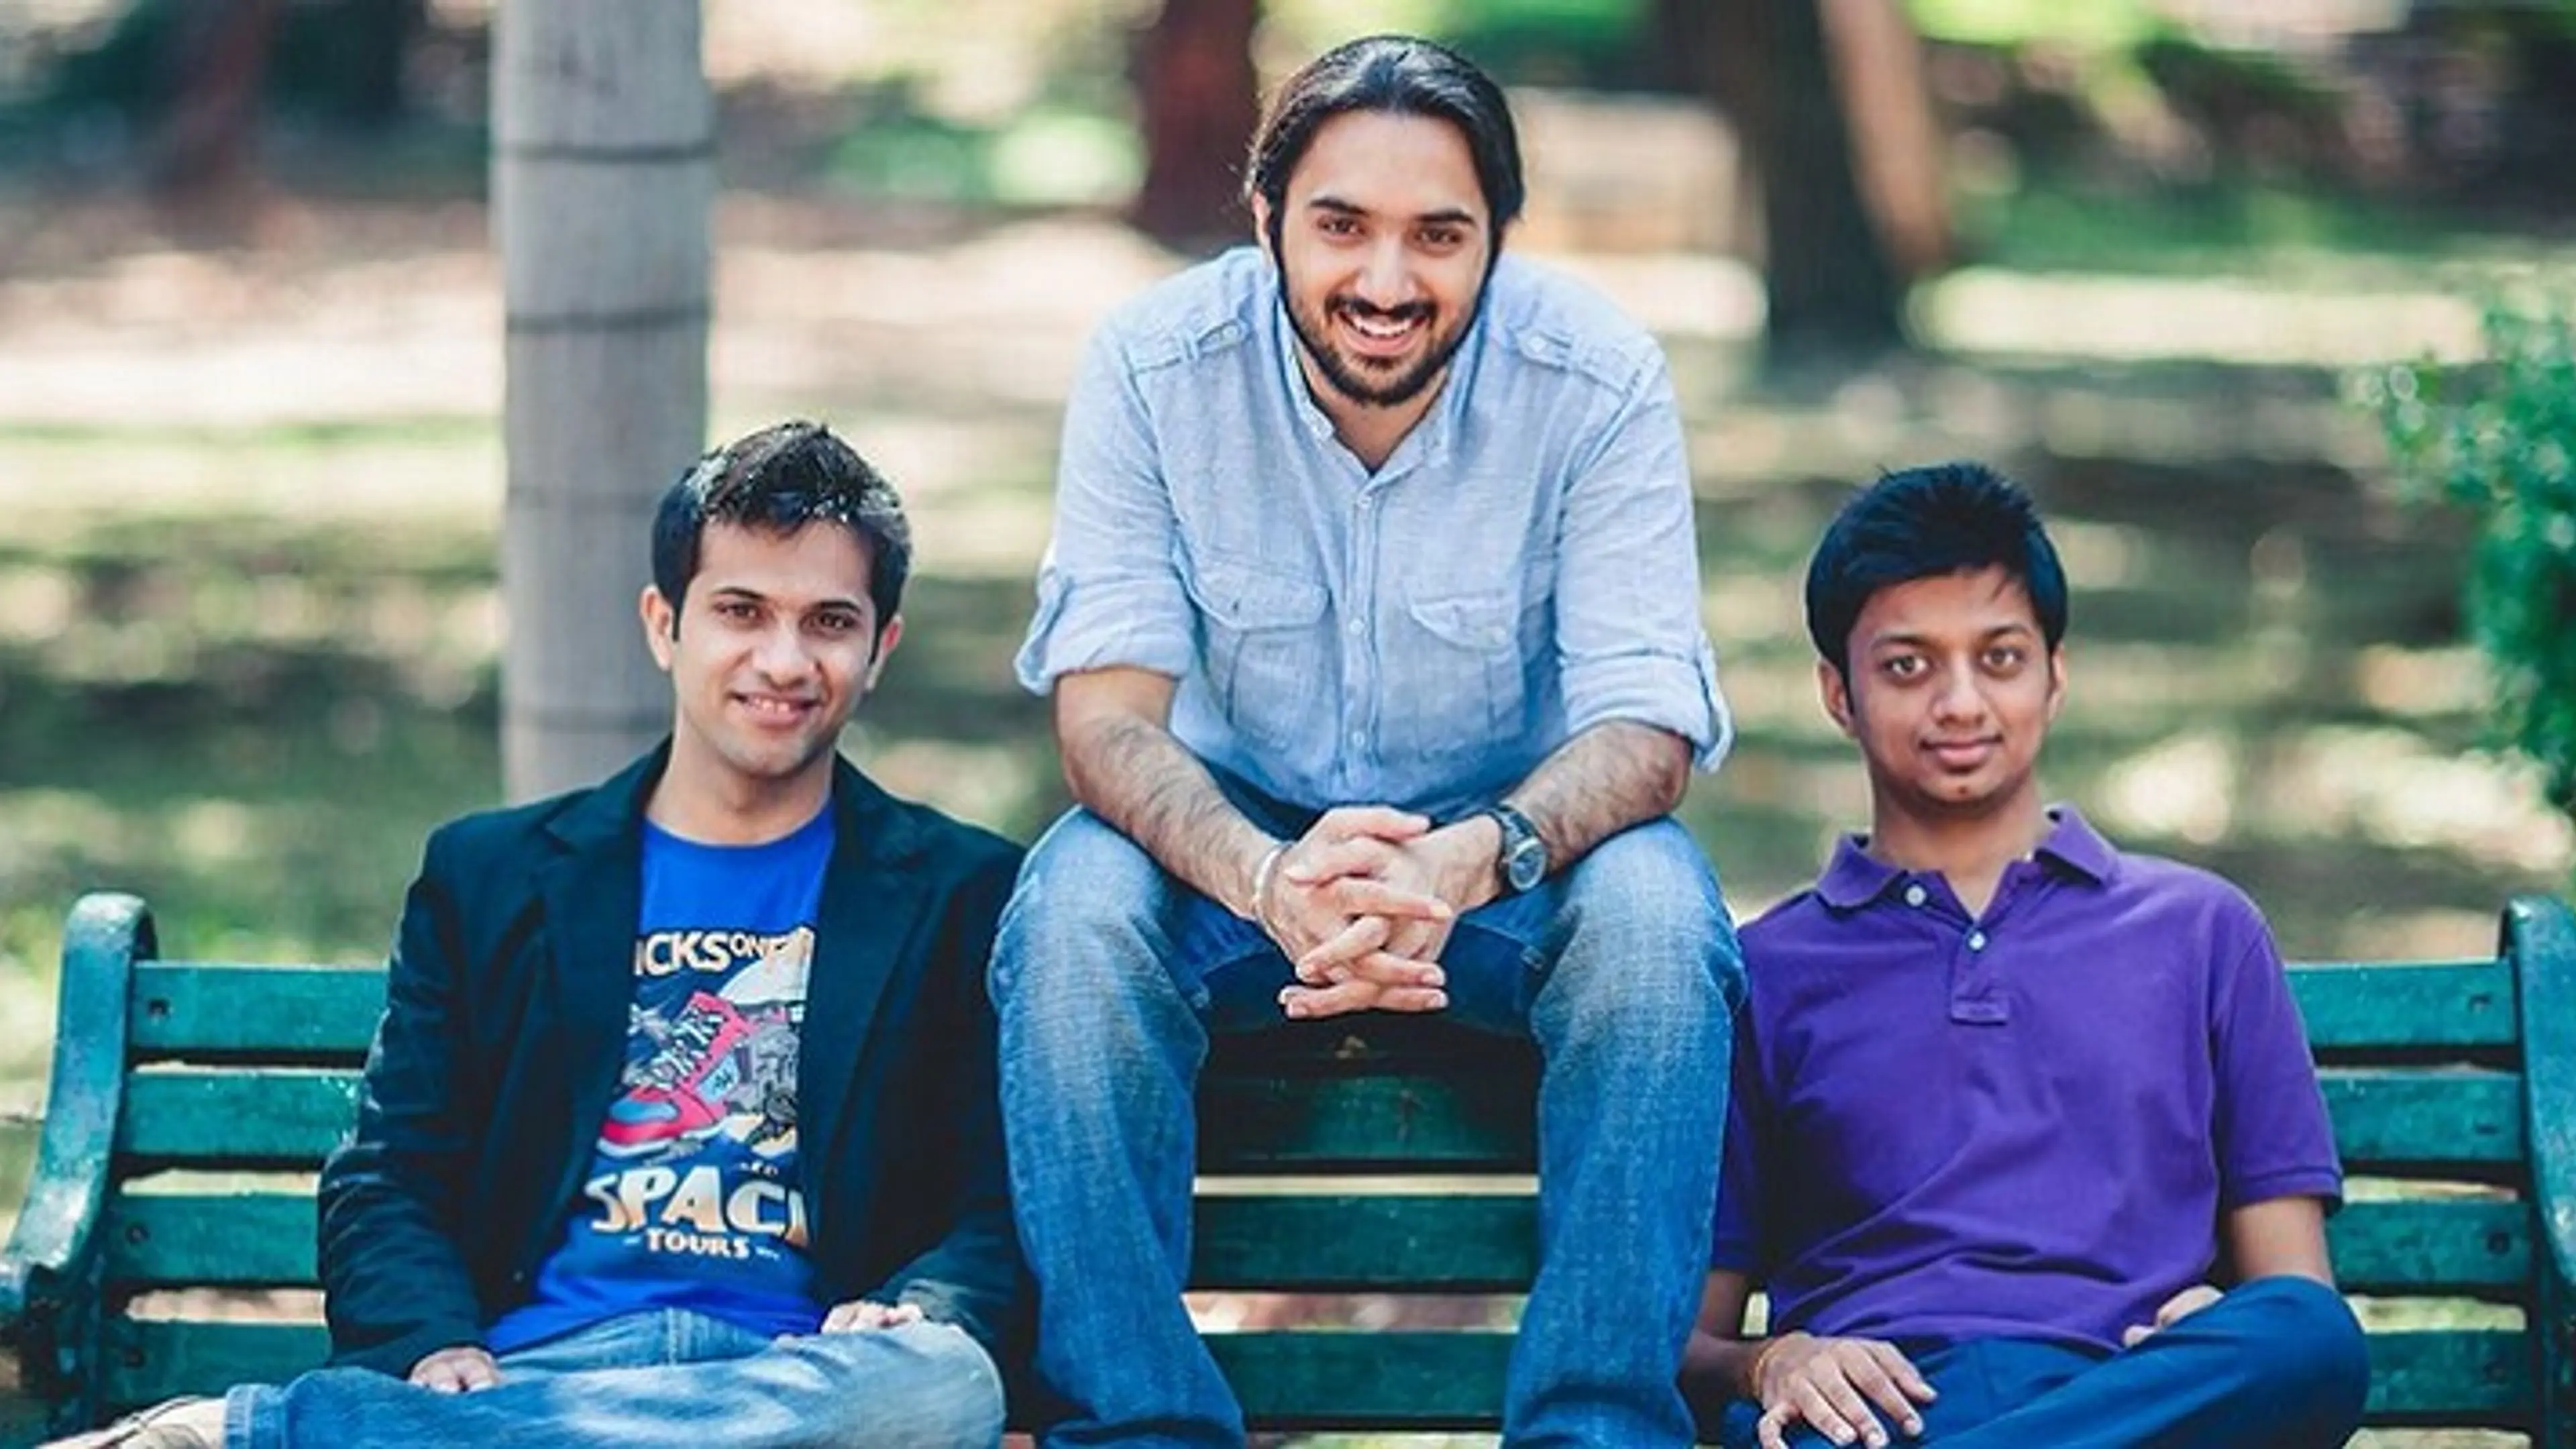 Headout raises $1.8 million seed round from Version One Ventures, 500 Startups, NVP and others